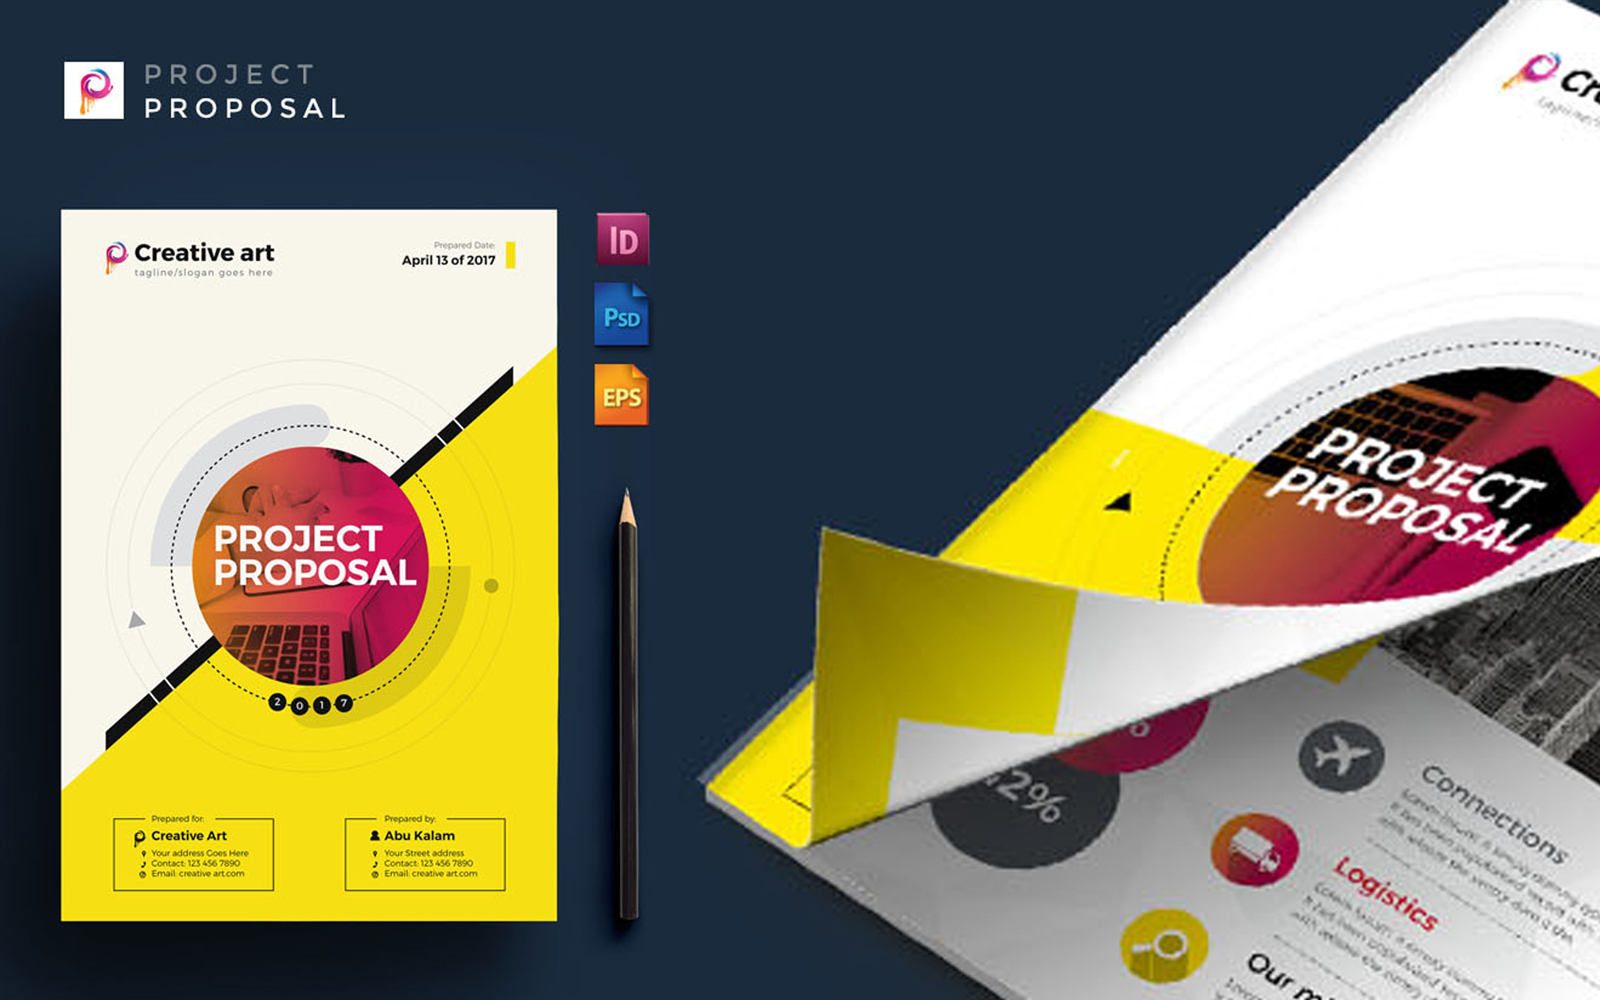 Every Company Business Project Proposal - Corporate Identity Template